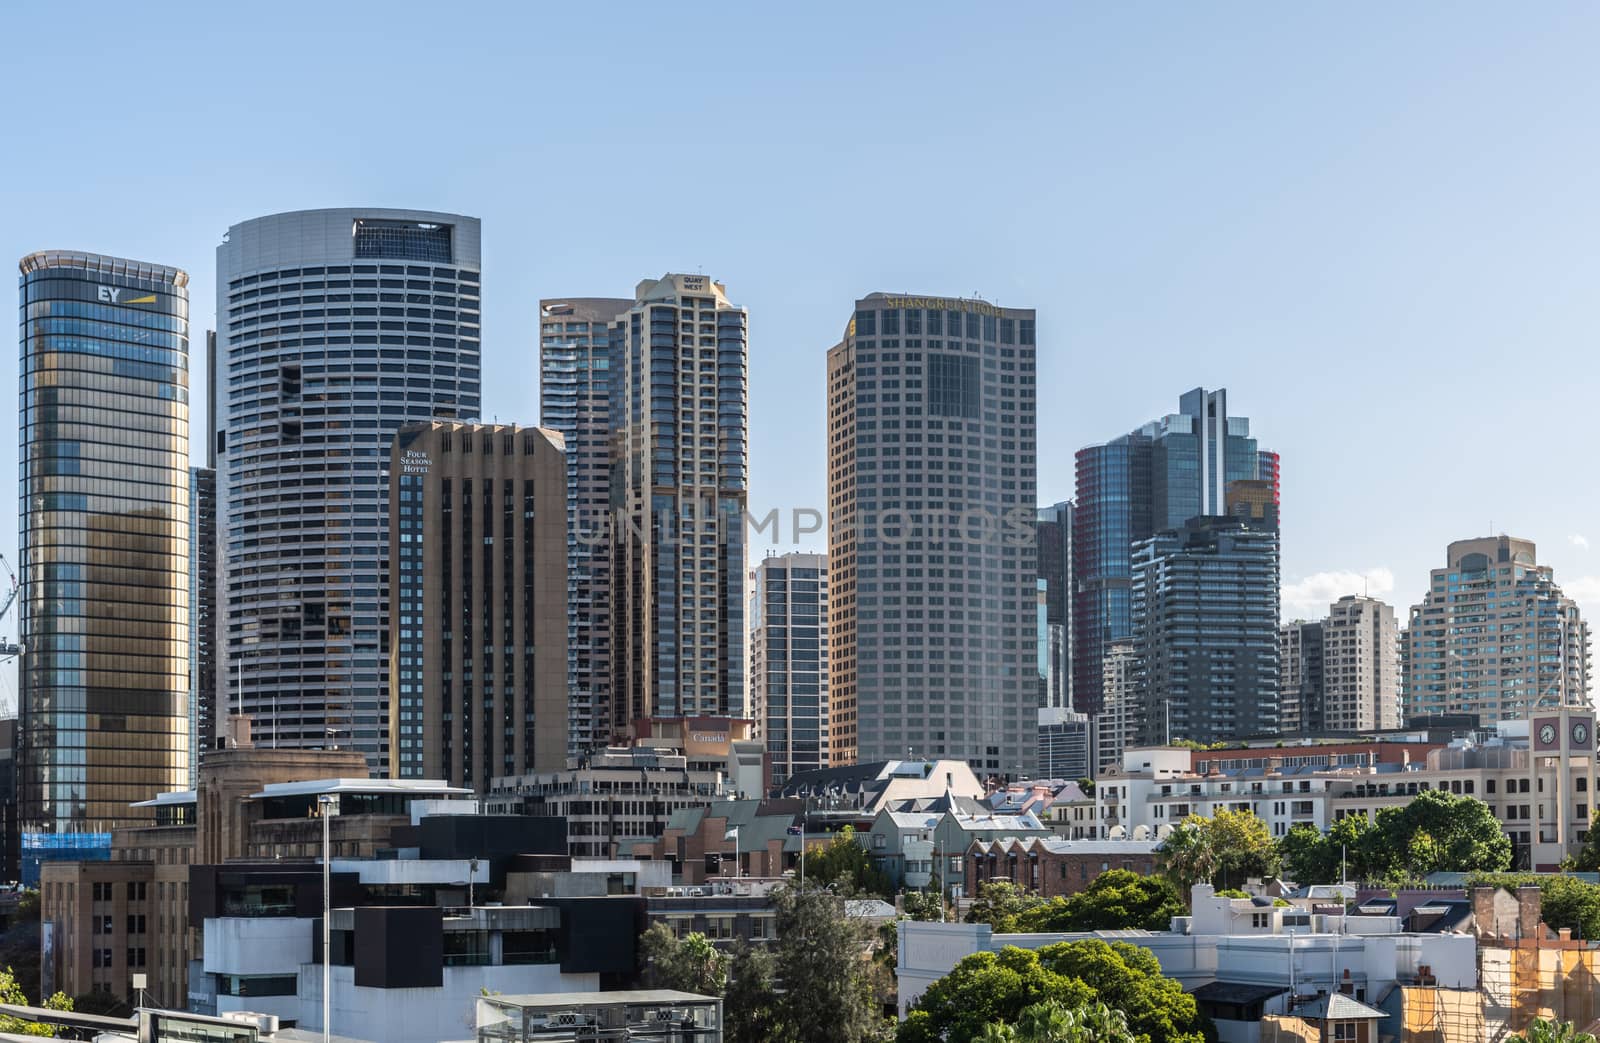 Sydney, Australia - February 12, 2019: Skyline of The Rocks with highrises west of Circular Bay featuring hotels such as Shangri-la and Four Seasons. Evening shot from dock at Circular Bay.